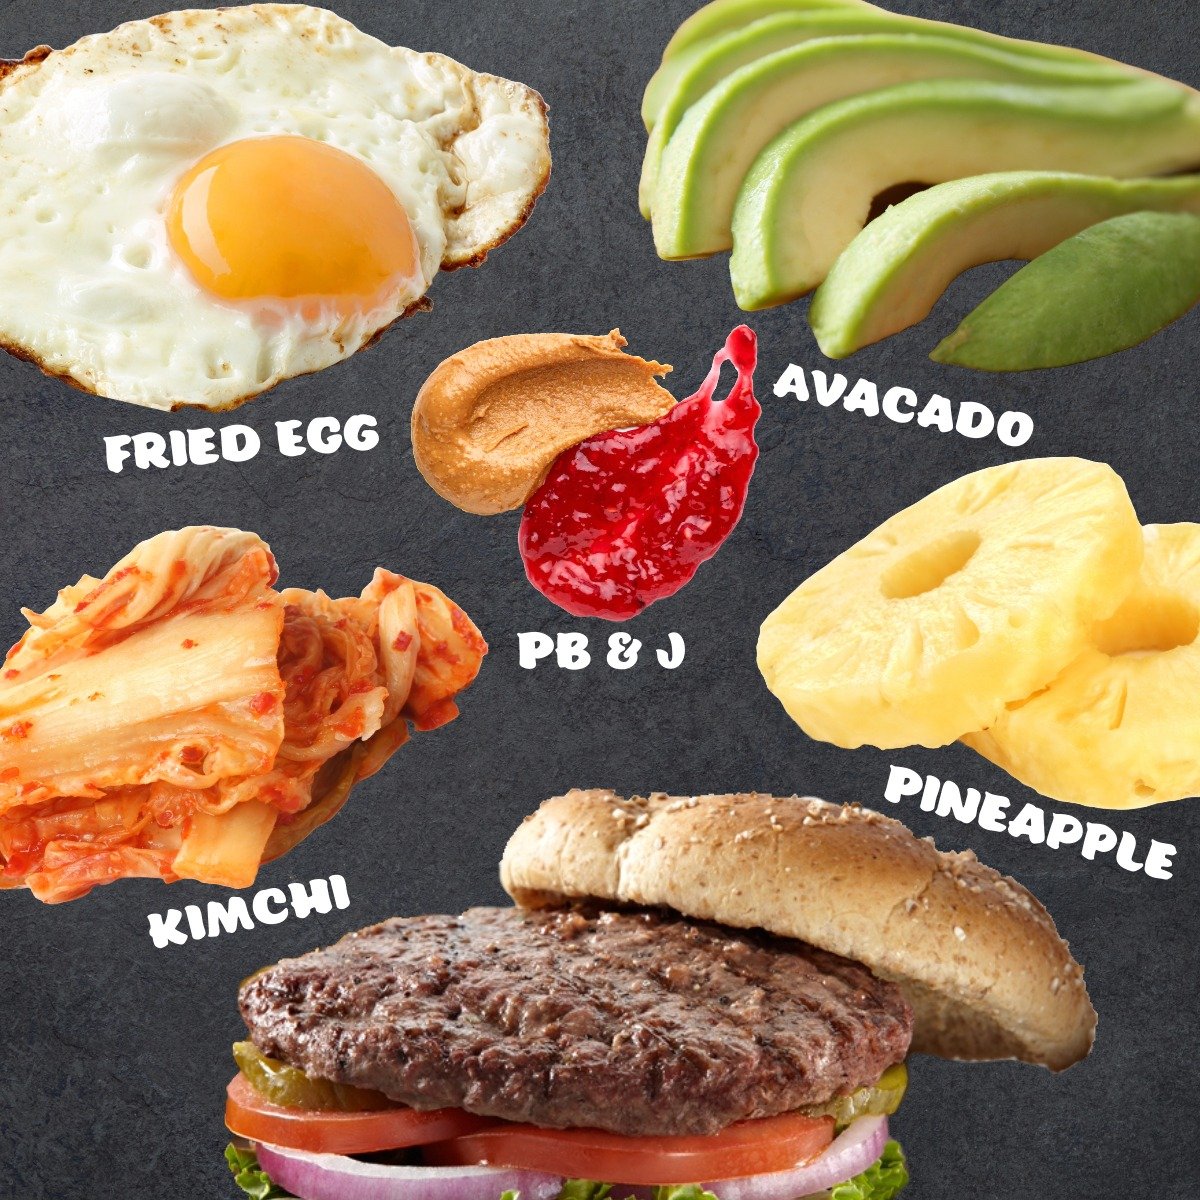 Celebrate National Burger Month with a twist! 🍔 Have you given any of these unique burger toppings a try? Let us know!

#MidamarHalal #Halal #HalalBurger #NationalBurgerMonth